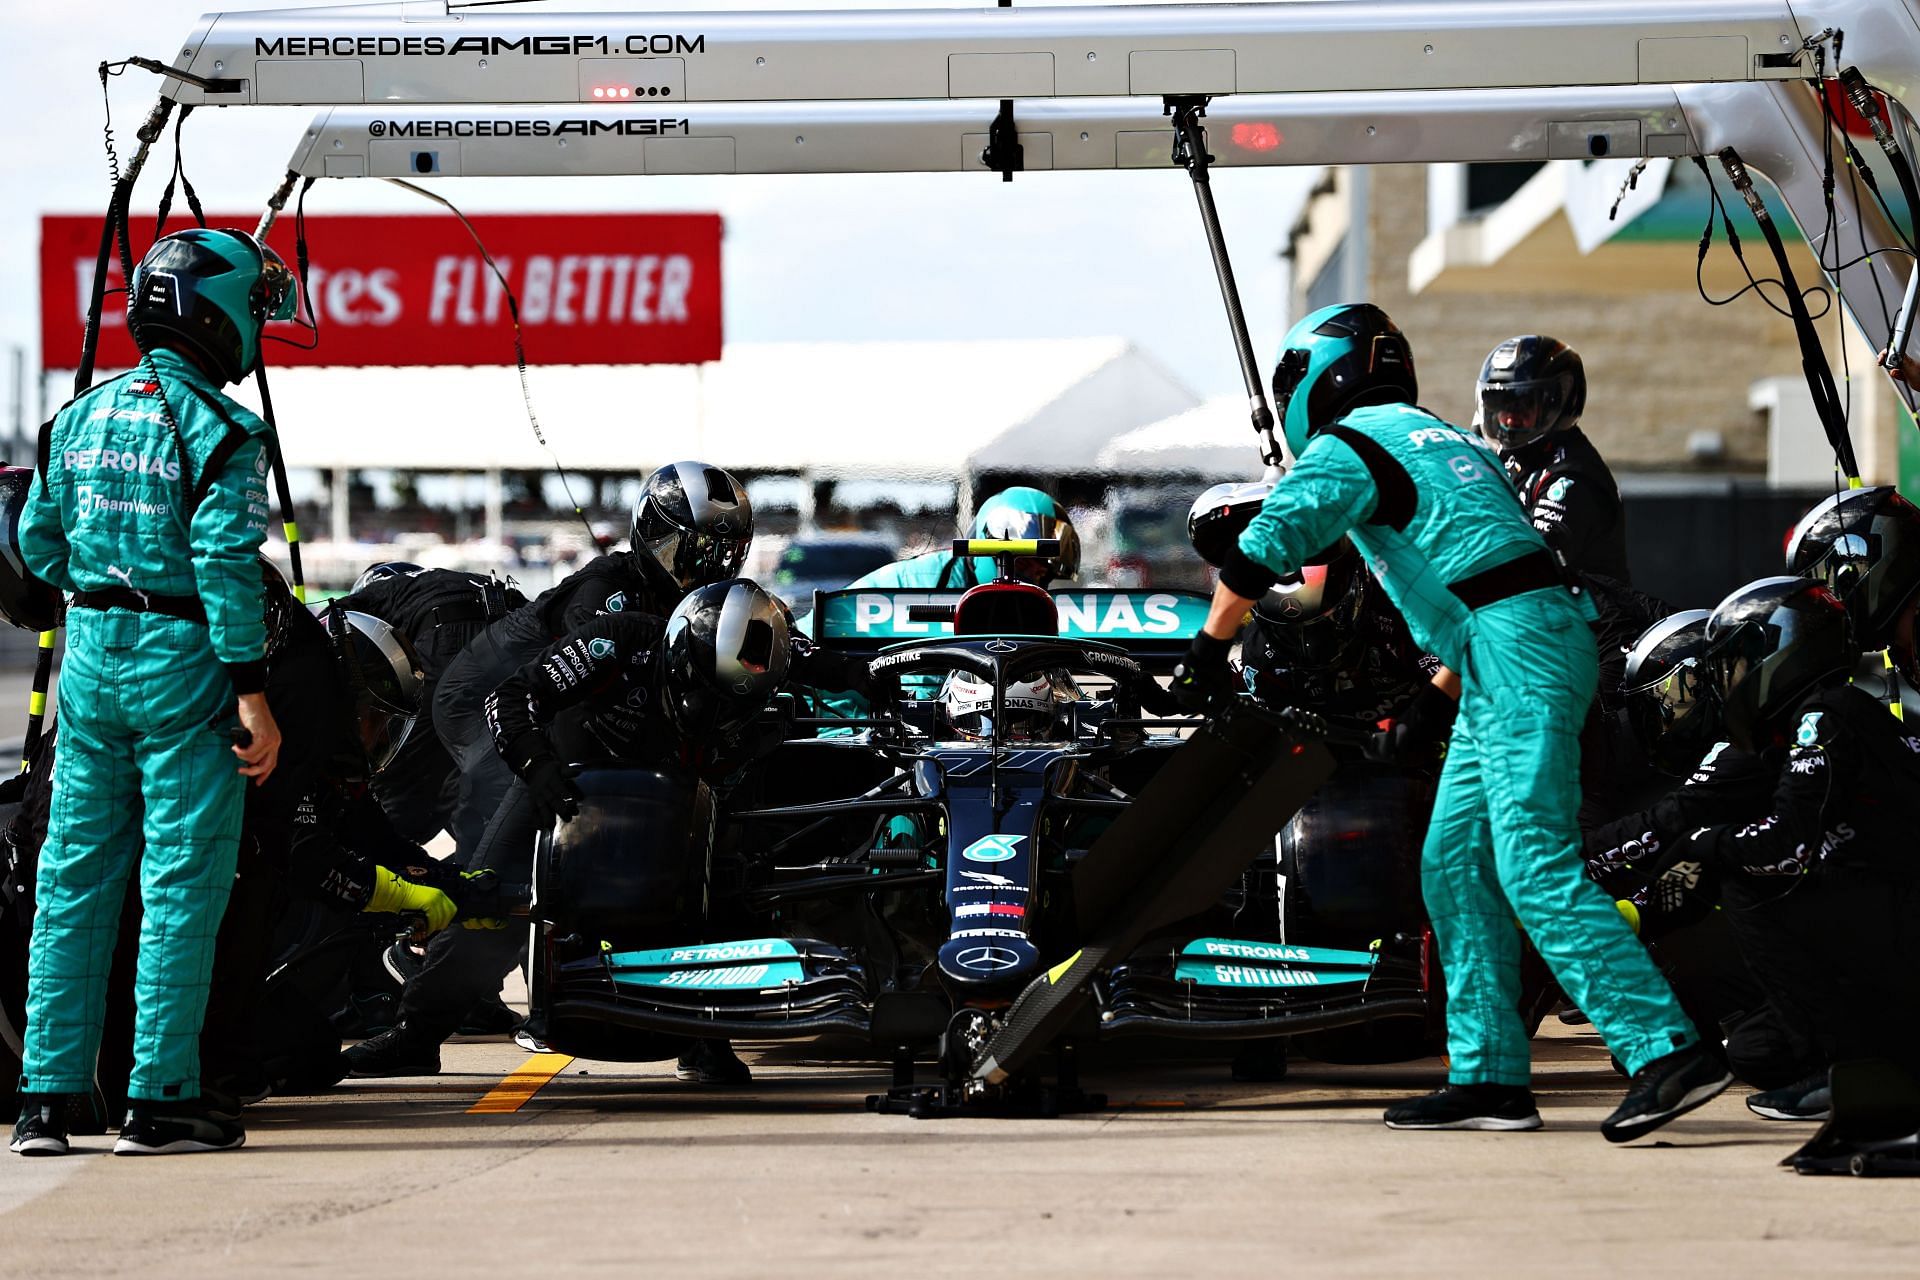 Mercedes driver Valtteri Bottas during the 2021 USGP at Circuit of The Americas in Austin, Texas. (Photo by Mark Thompson/Getty Images)